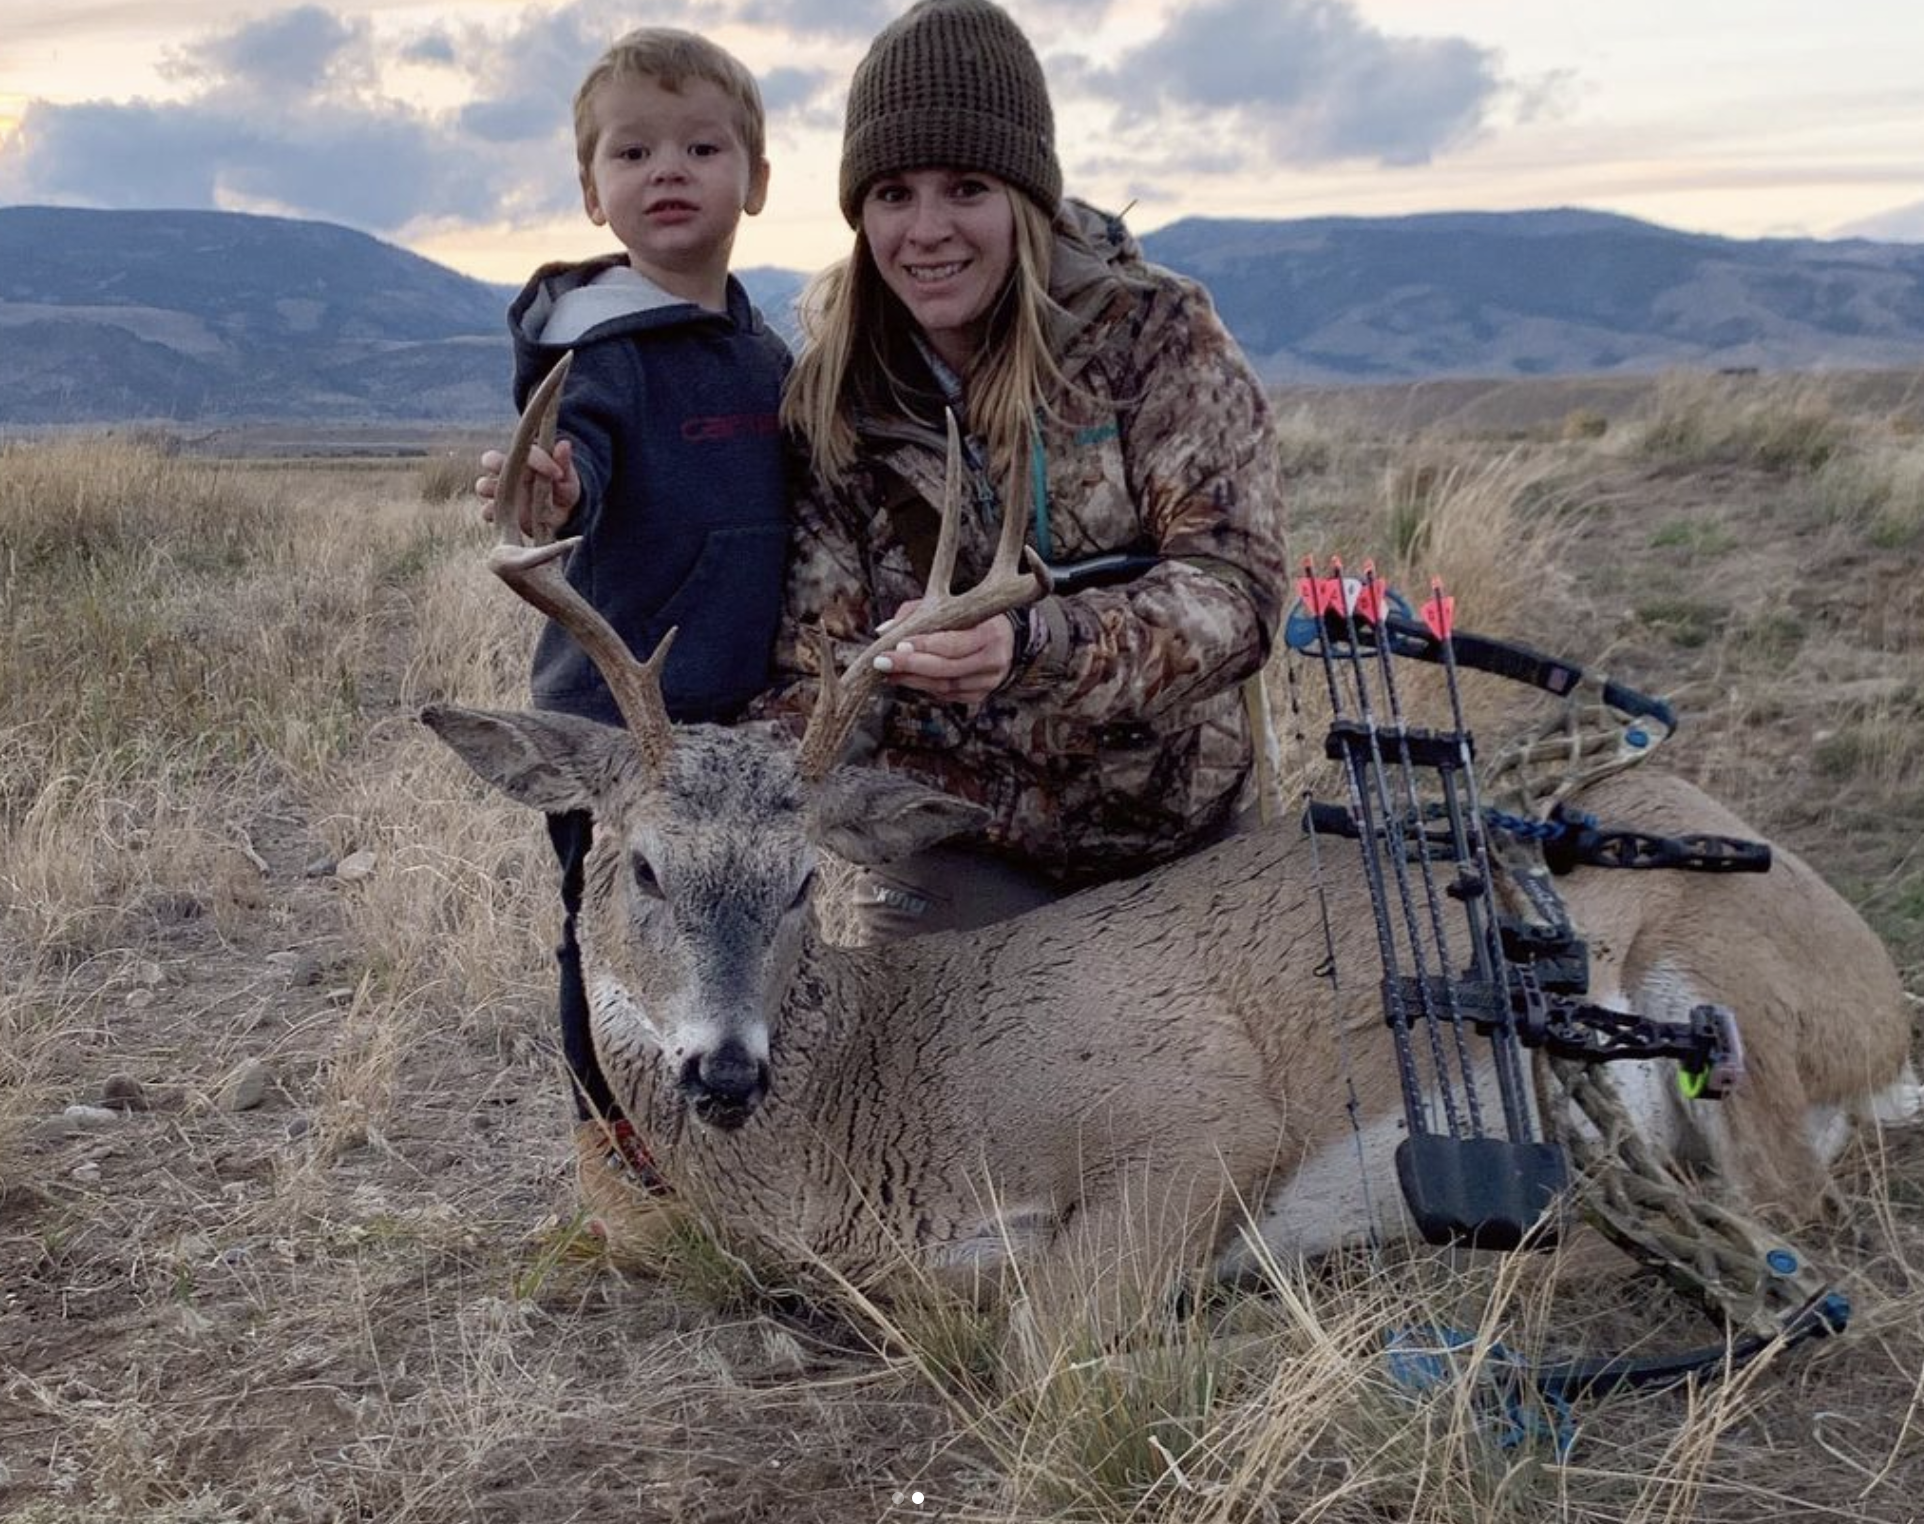 Hunting mamas like Erin Hill are here to stay.